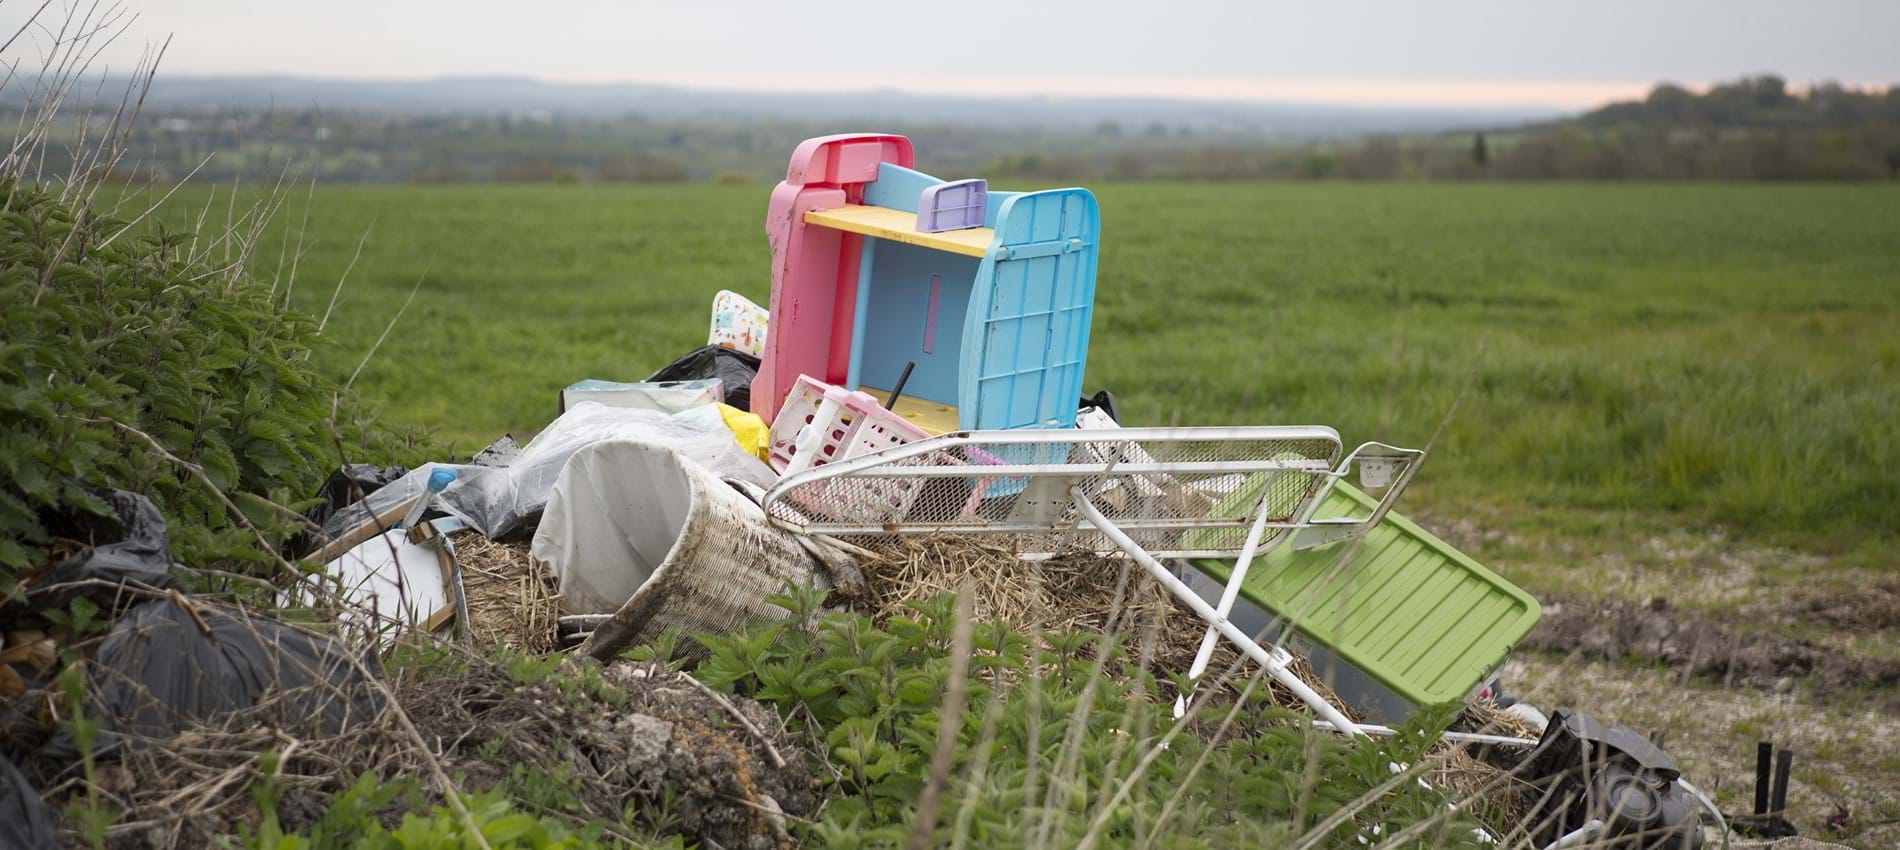 nojs Fly tipping on a field